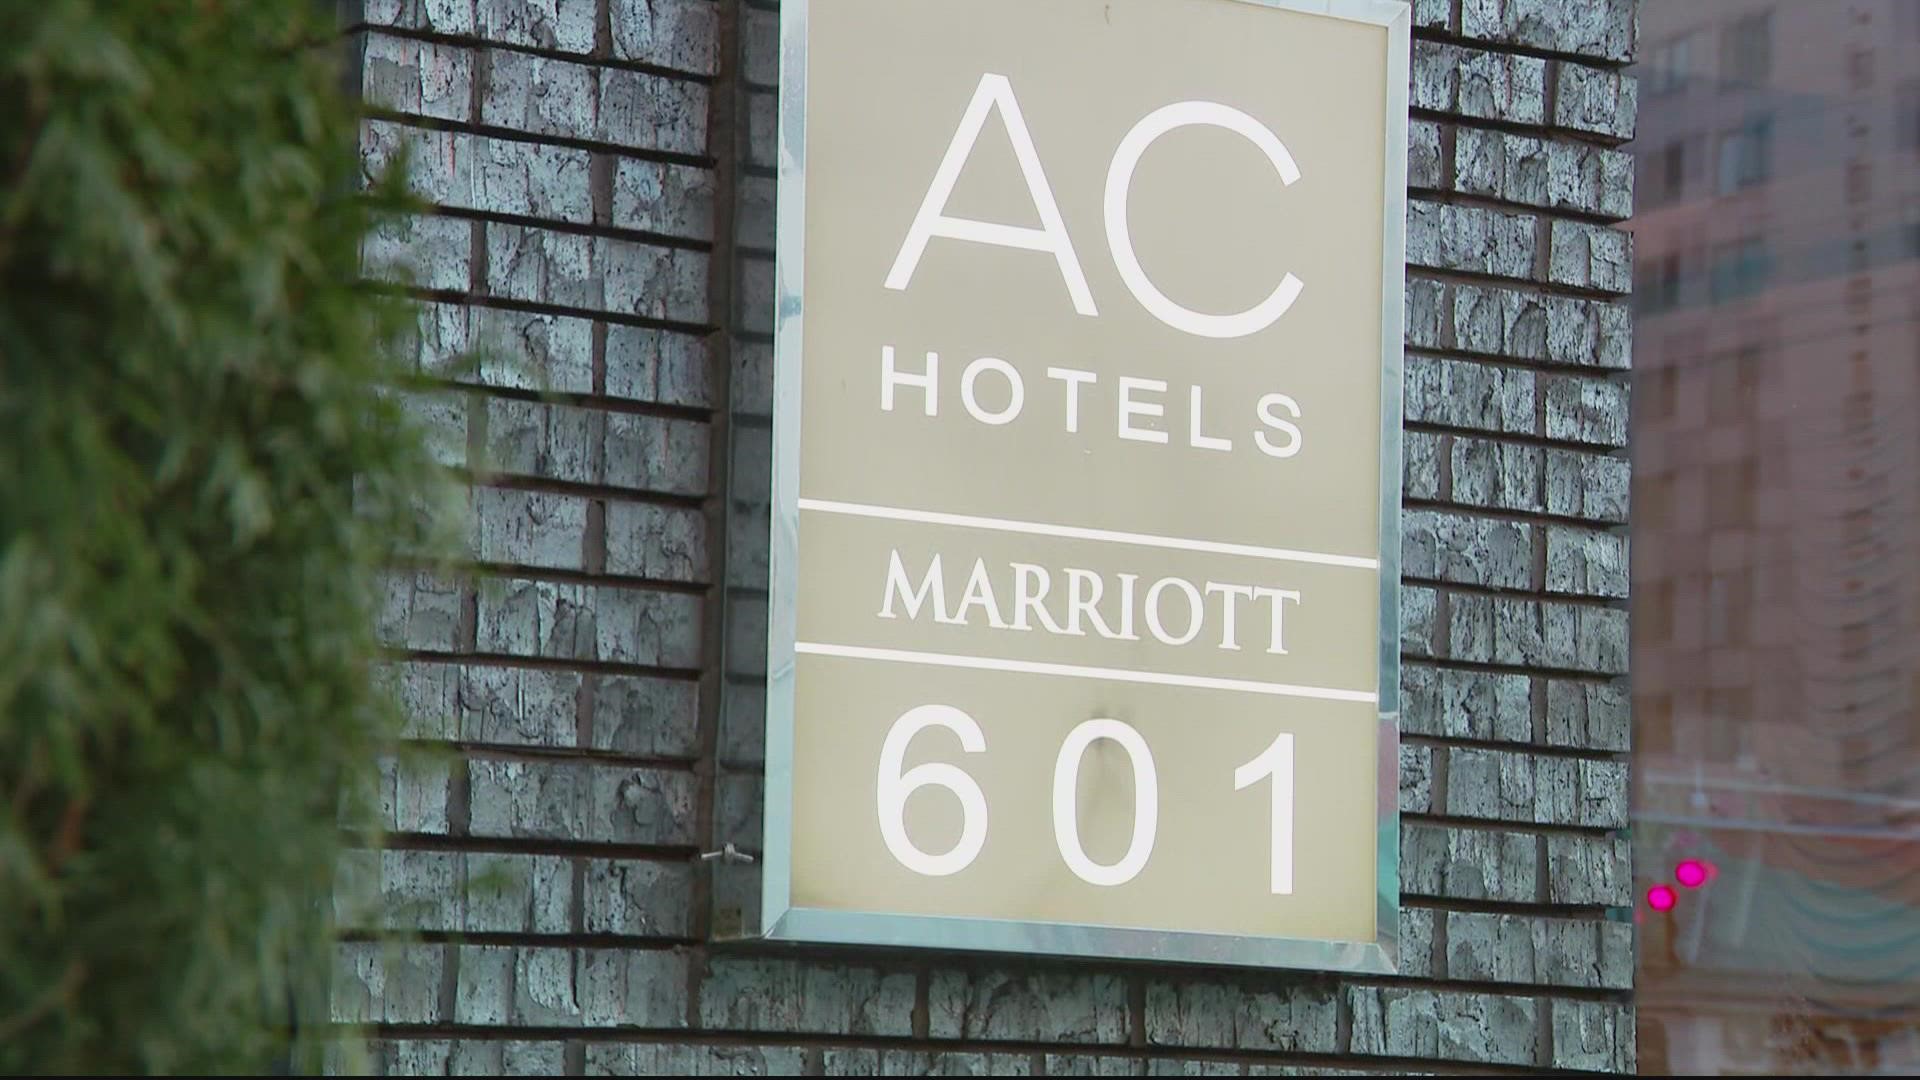 Police are investigating a shooting at a D.C. hotel in the early morning hours of Monday that left two men injured.